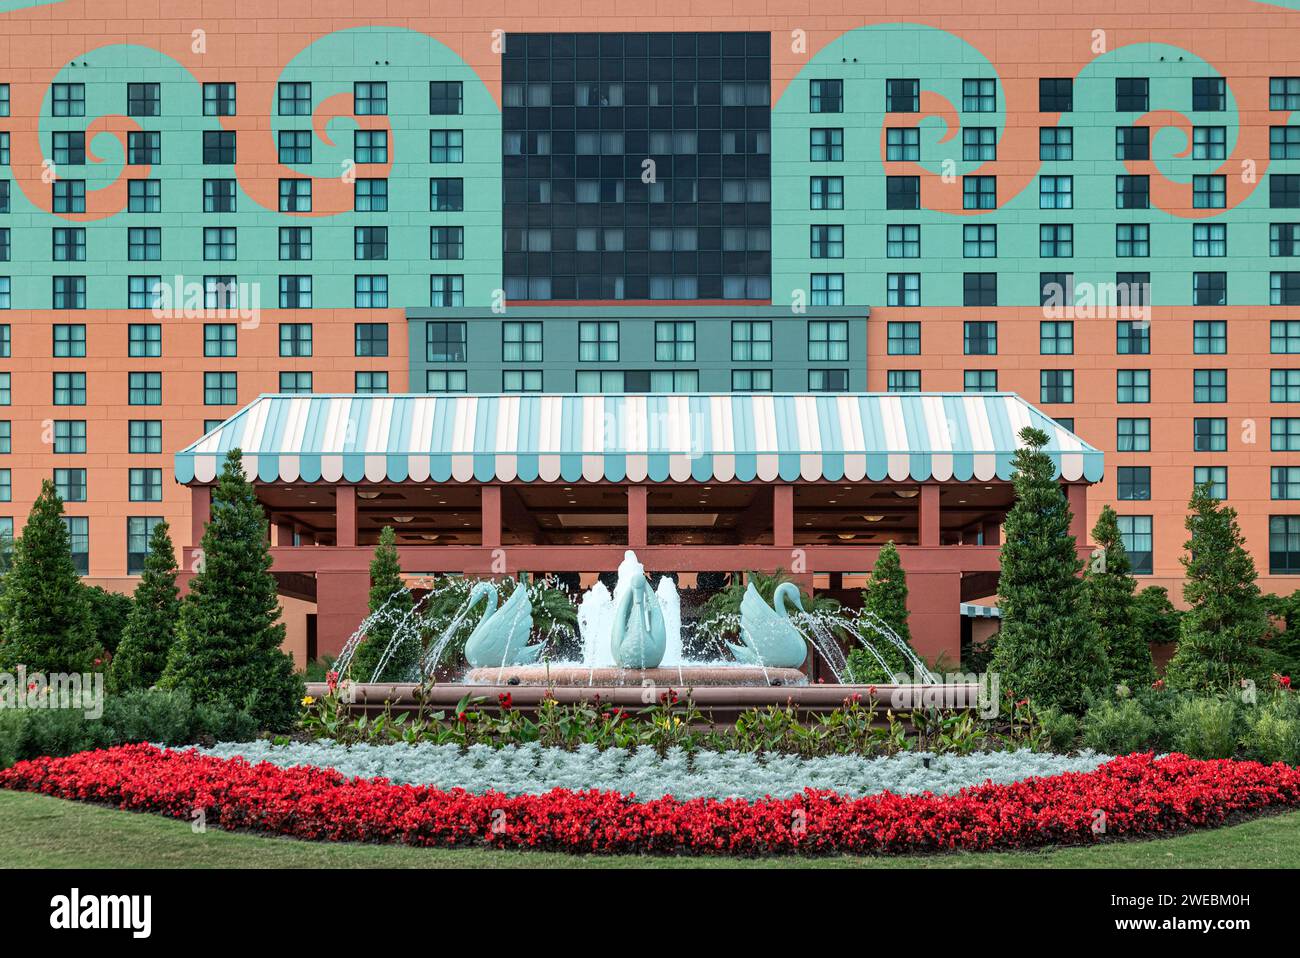 The Disney World Swan Hotel managed by Marriott. Stock Photo